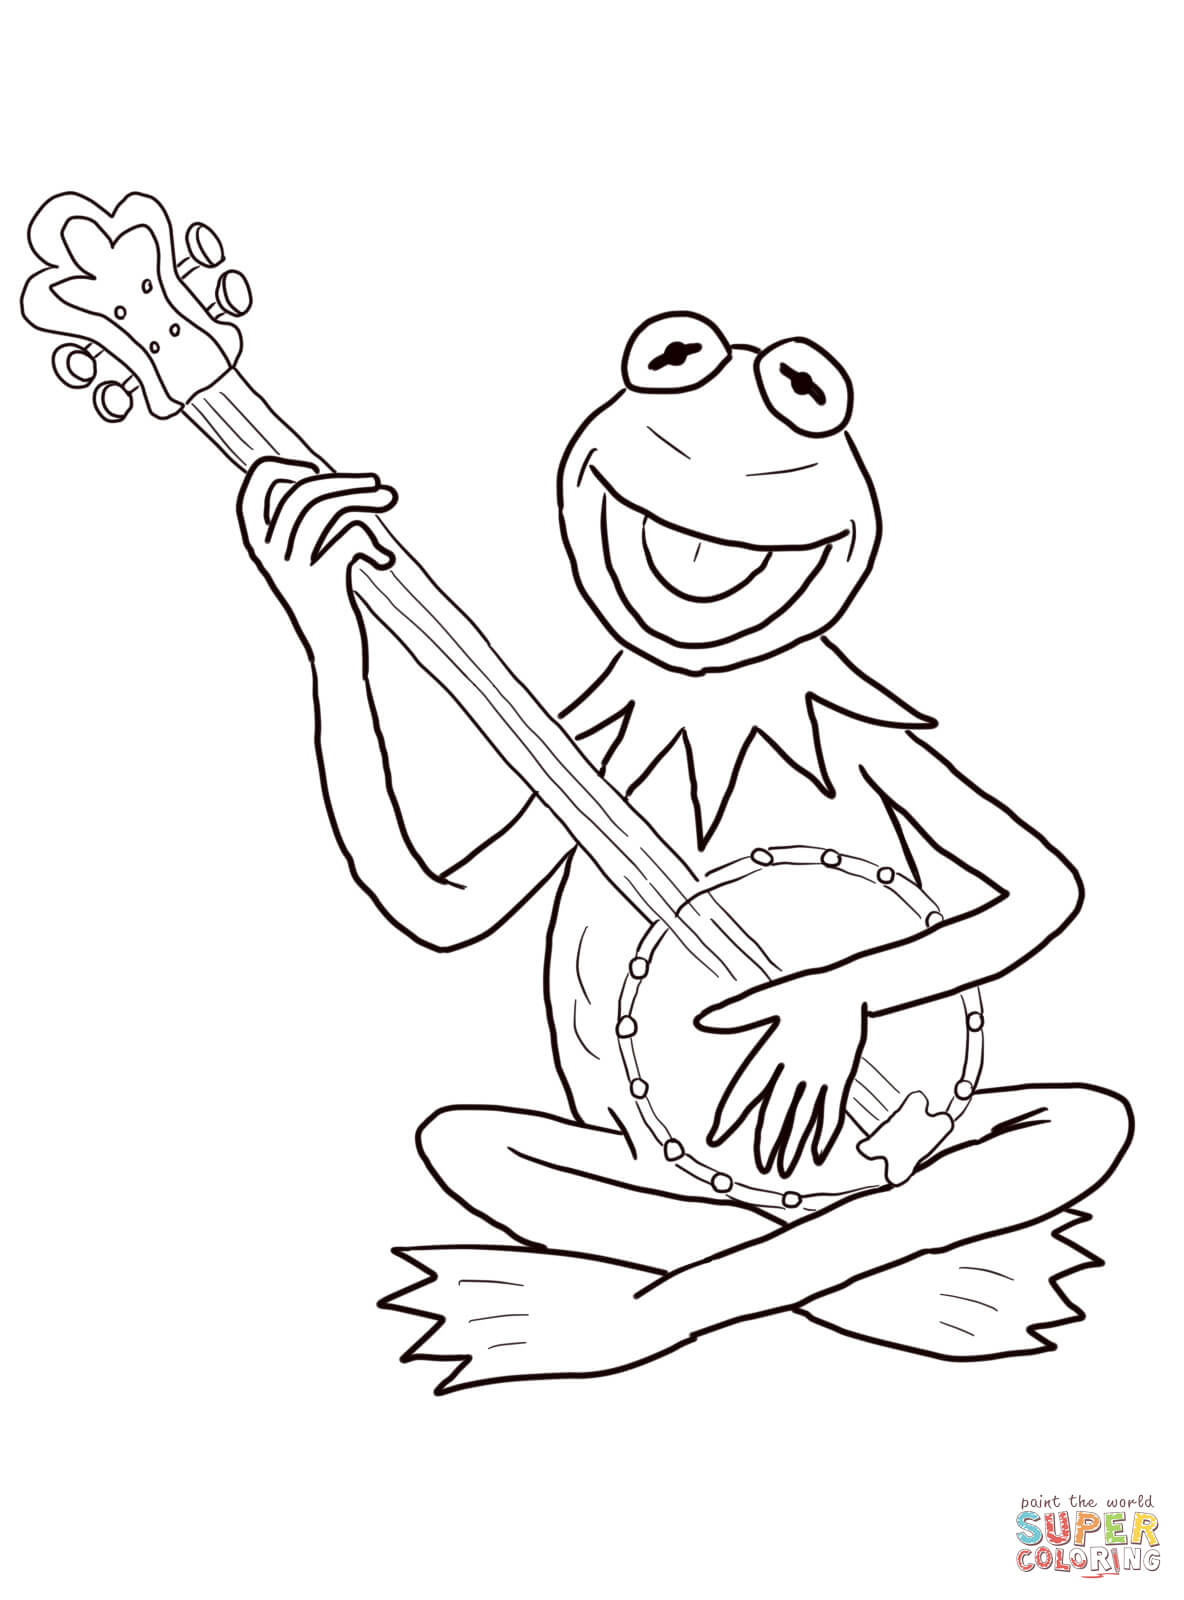 Kermit the frog playing guitar coloring page free printable coloring pages